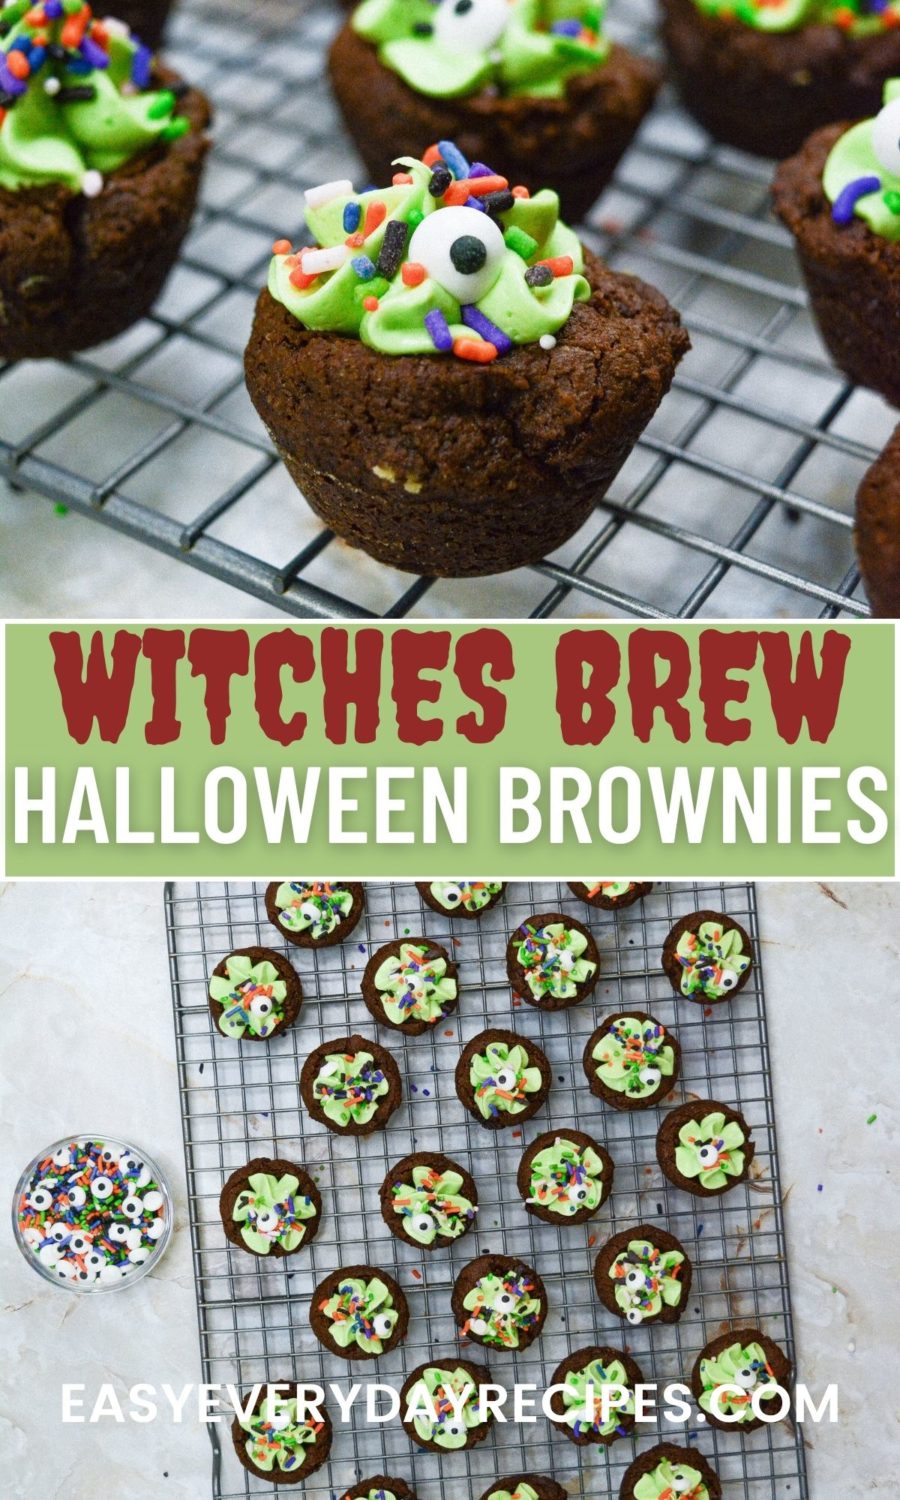 Witches brew halloween brownies.